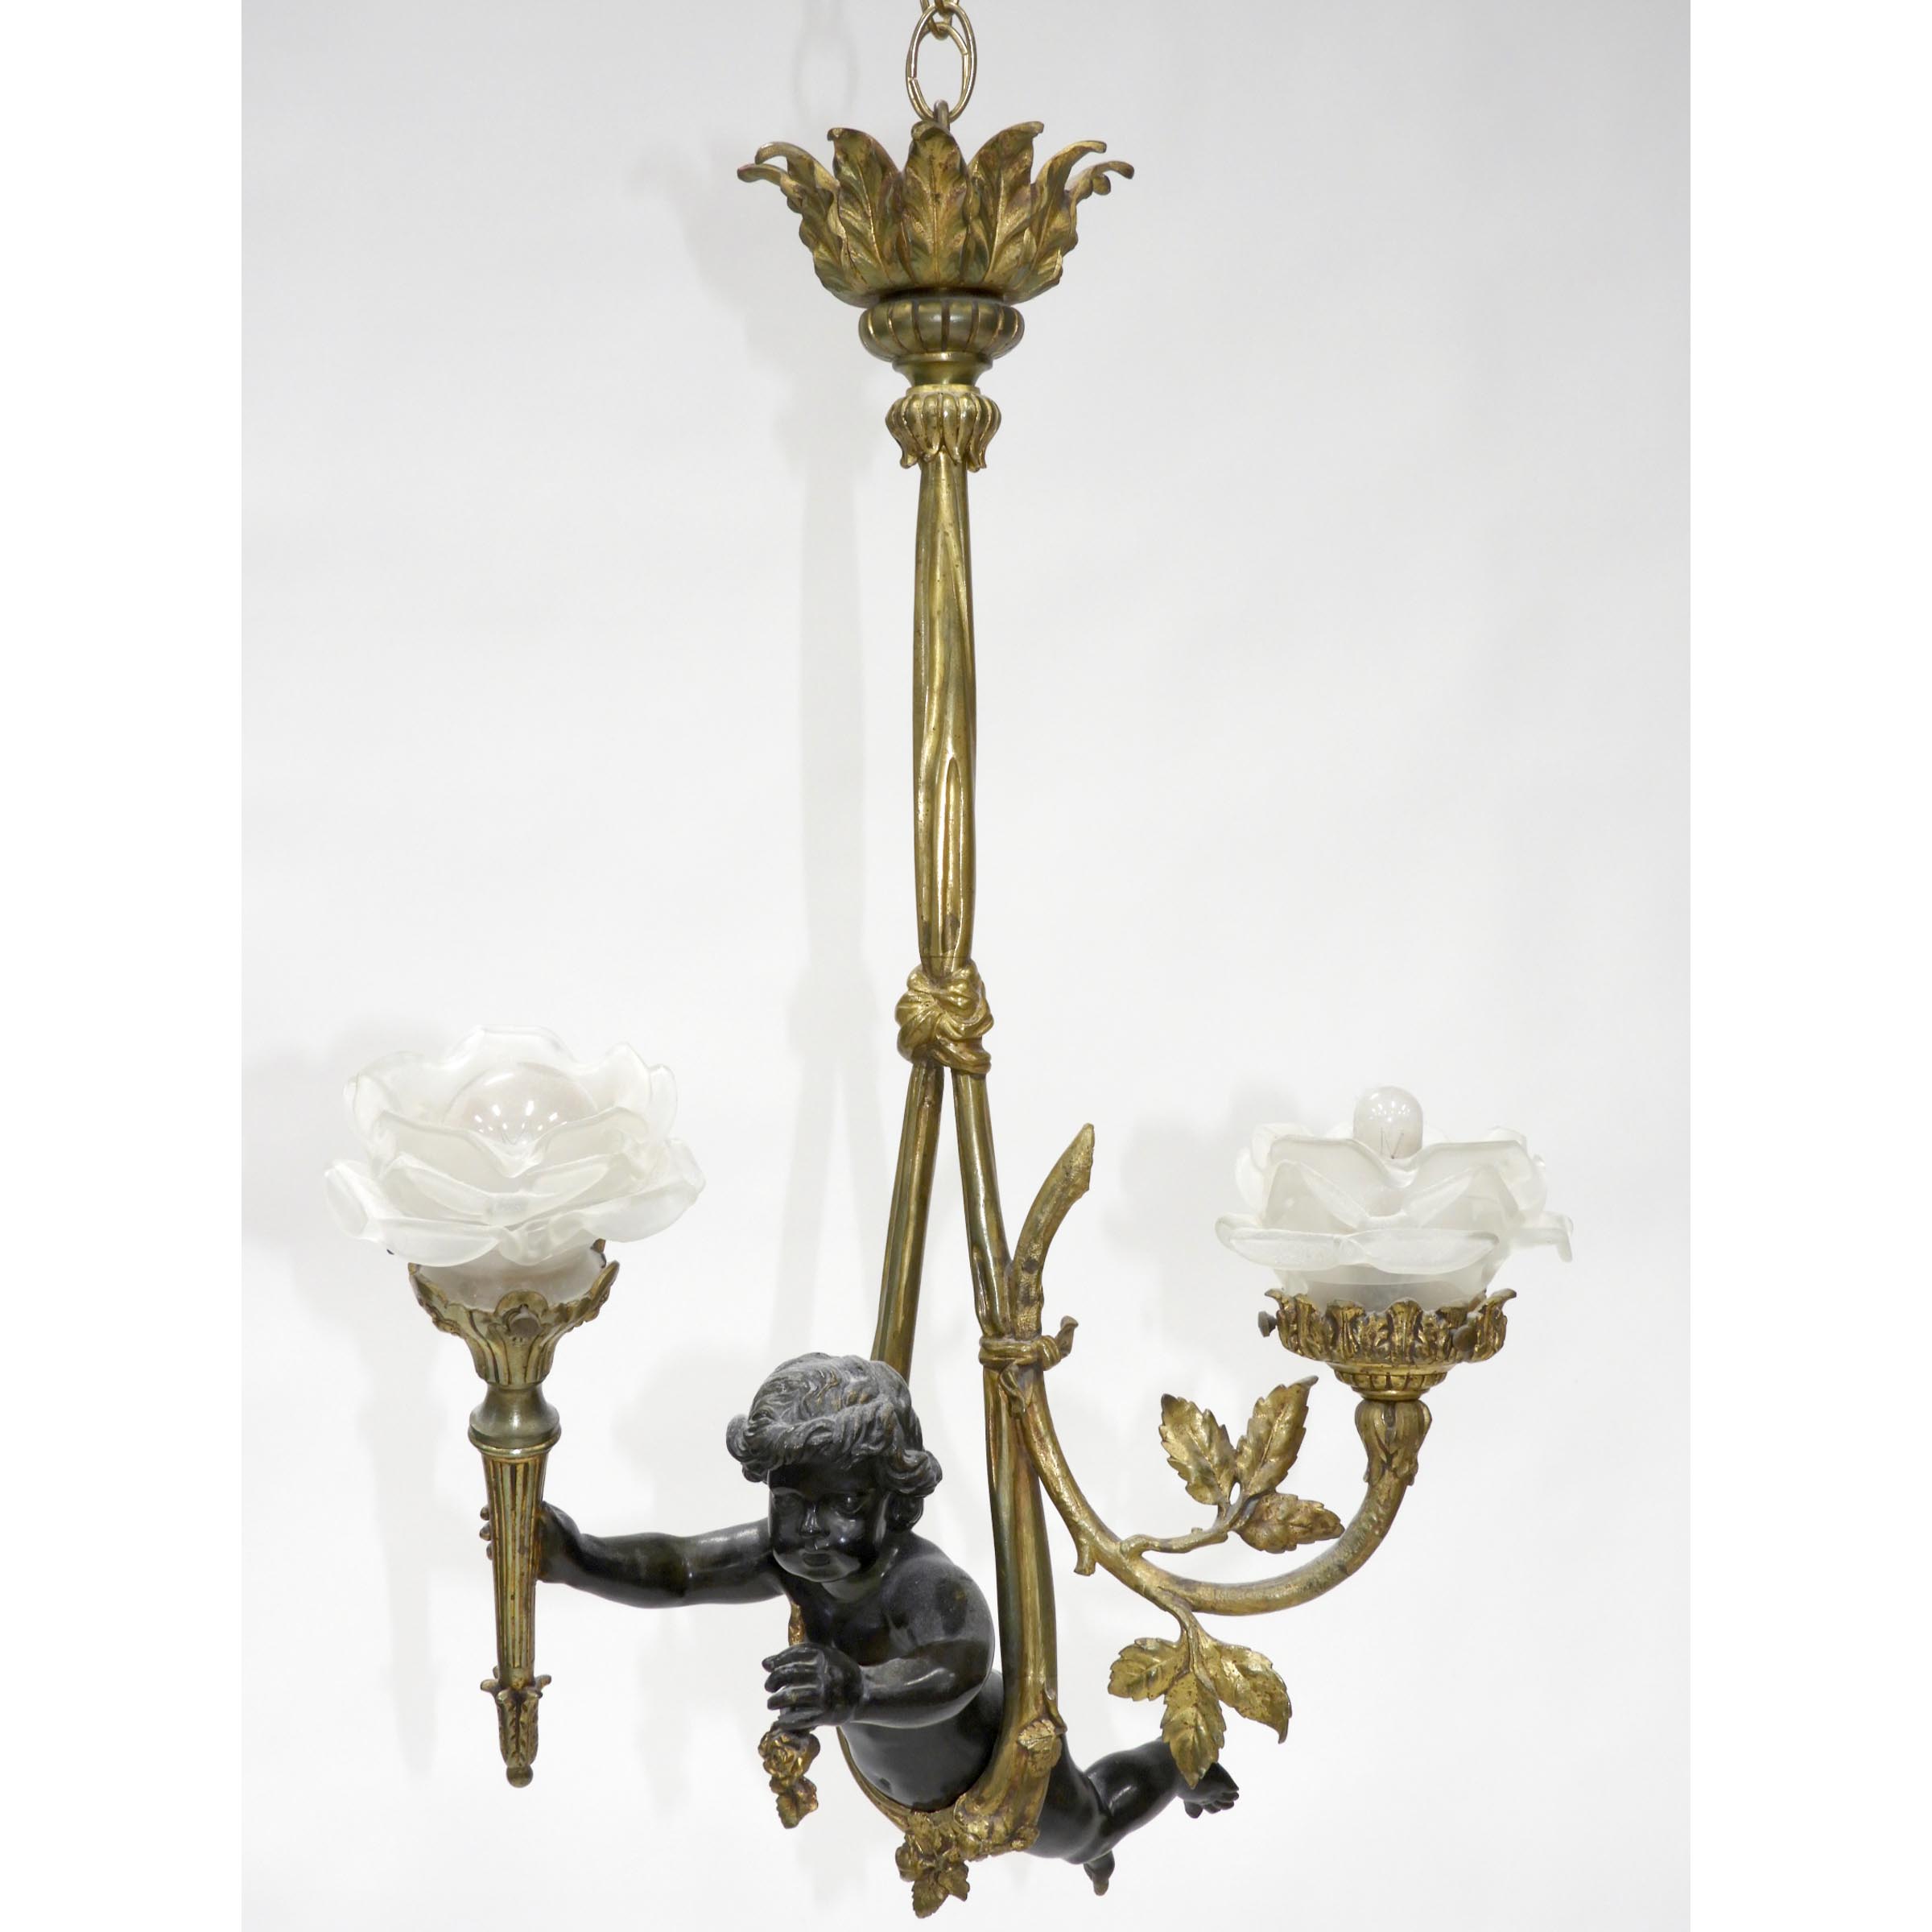 Belle Epoque Patinated and Gilt Bronze Figural Hanging Light Fixture